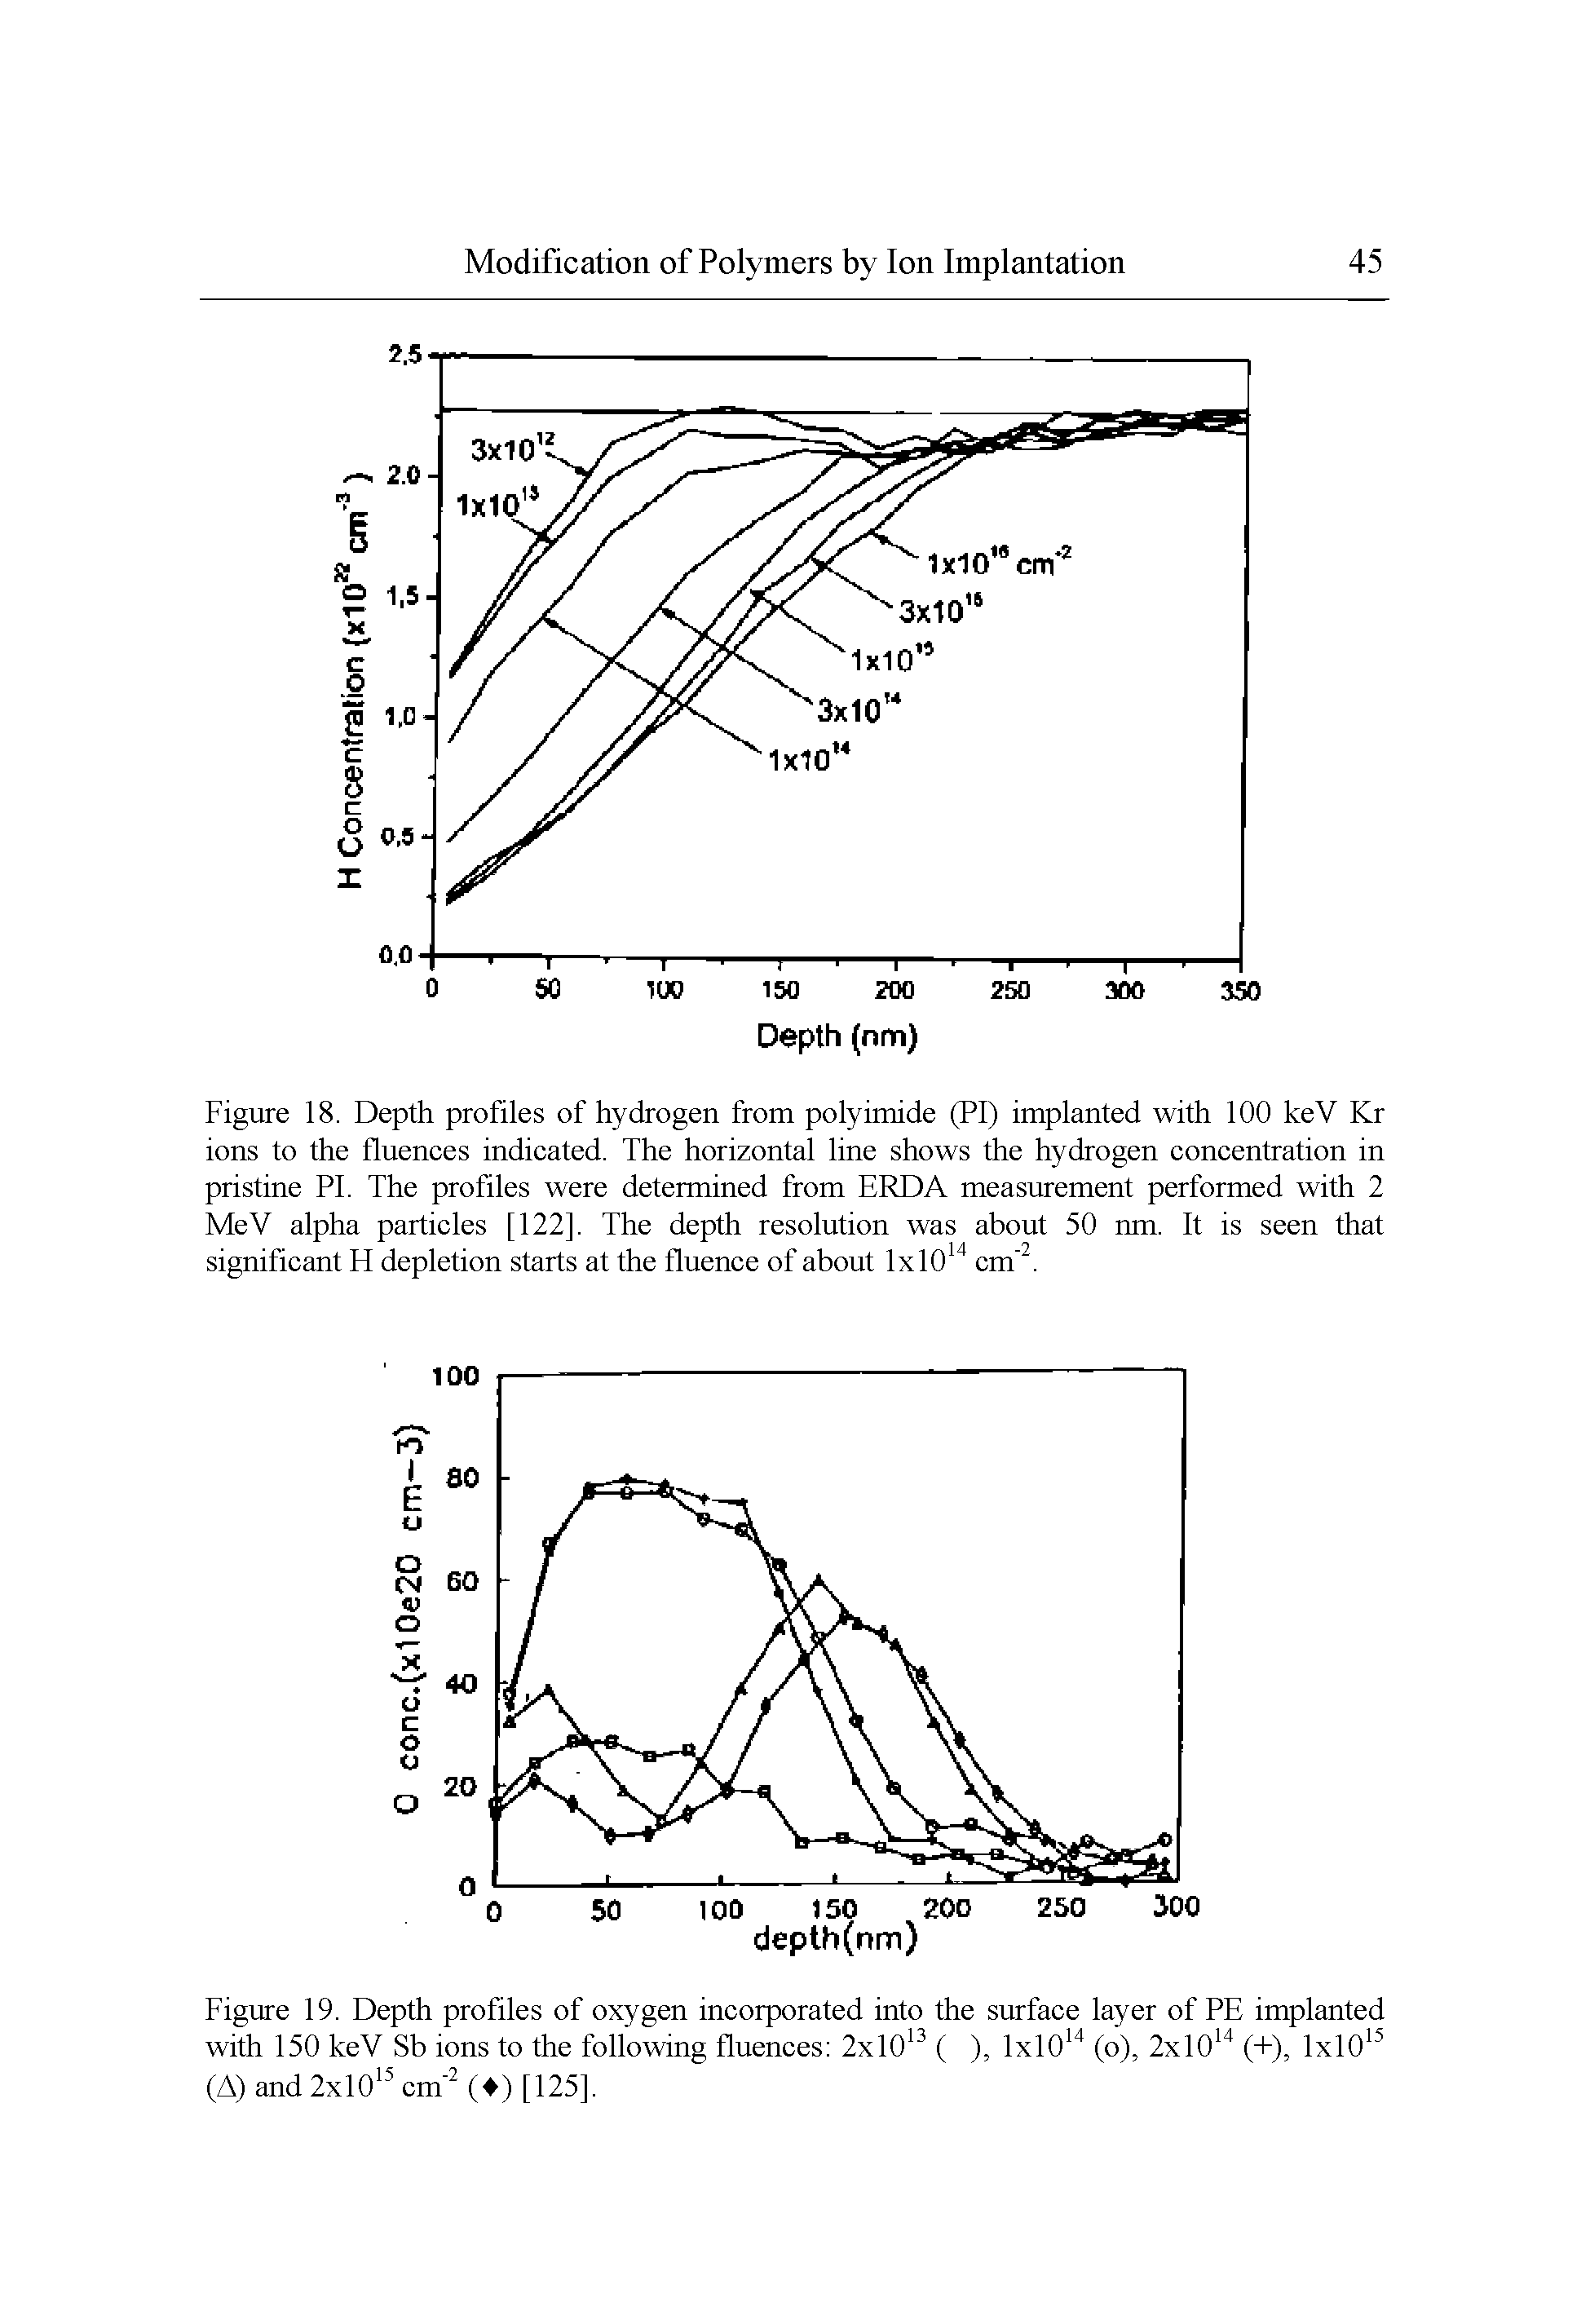 Figure 18. Depth profiles of hydrogen from polyimide (PI) implanted with 100 keV Kr ions to the fluences indicated. The horizontal line shows the hydrogen concentration in pristine PI. The profiles were determined from ERDA measurement performed with 2 MeV alpha particles [122]. The depth resolution was about 50 nm. It is seen that significant H depletion starts at the fluence of about IxlO " cm. ...